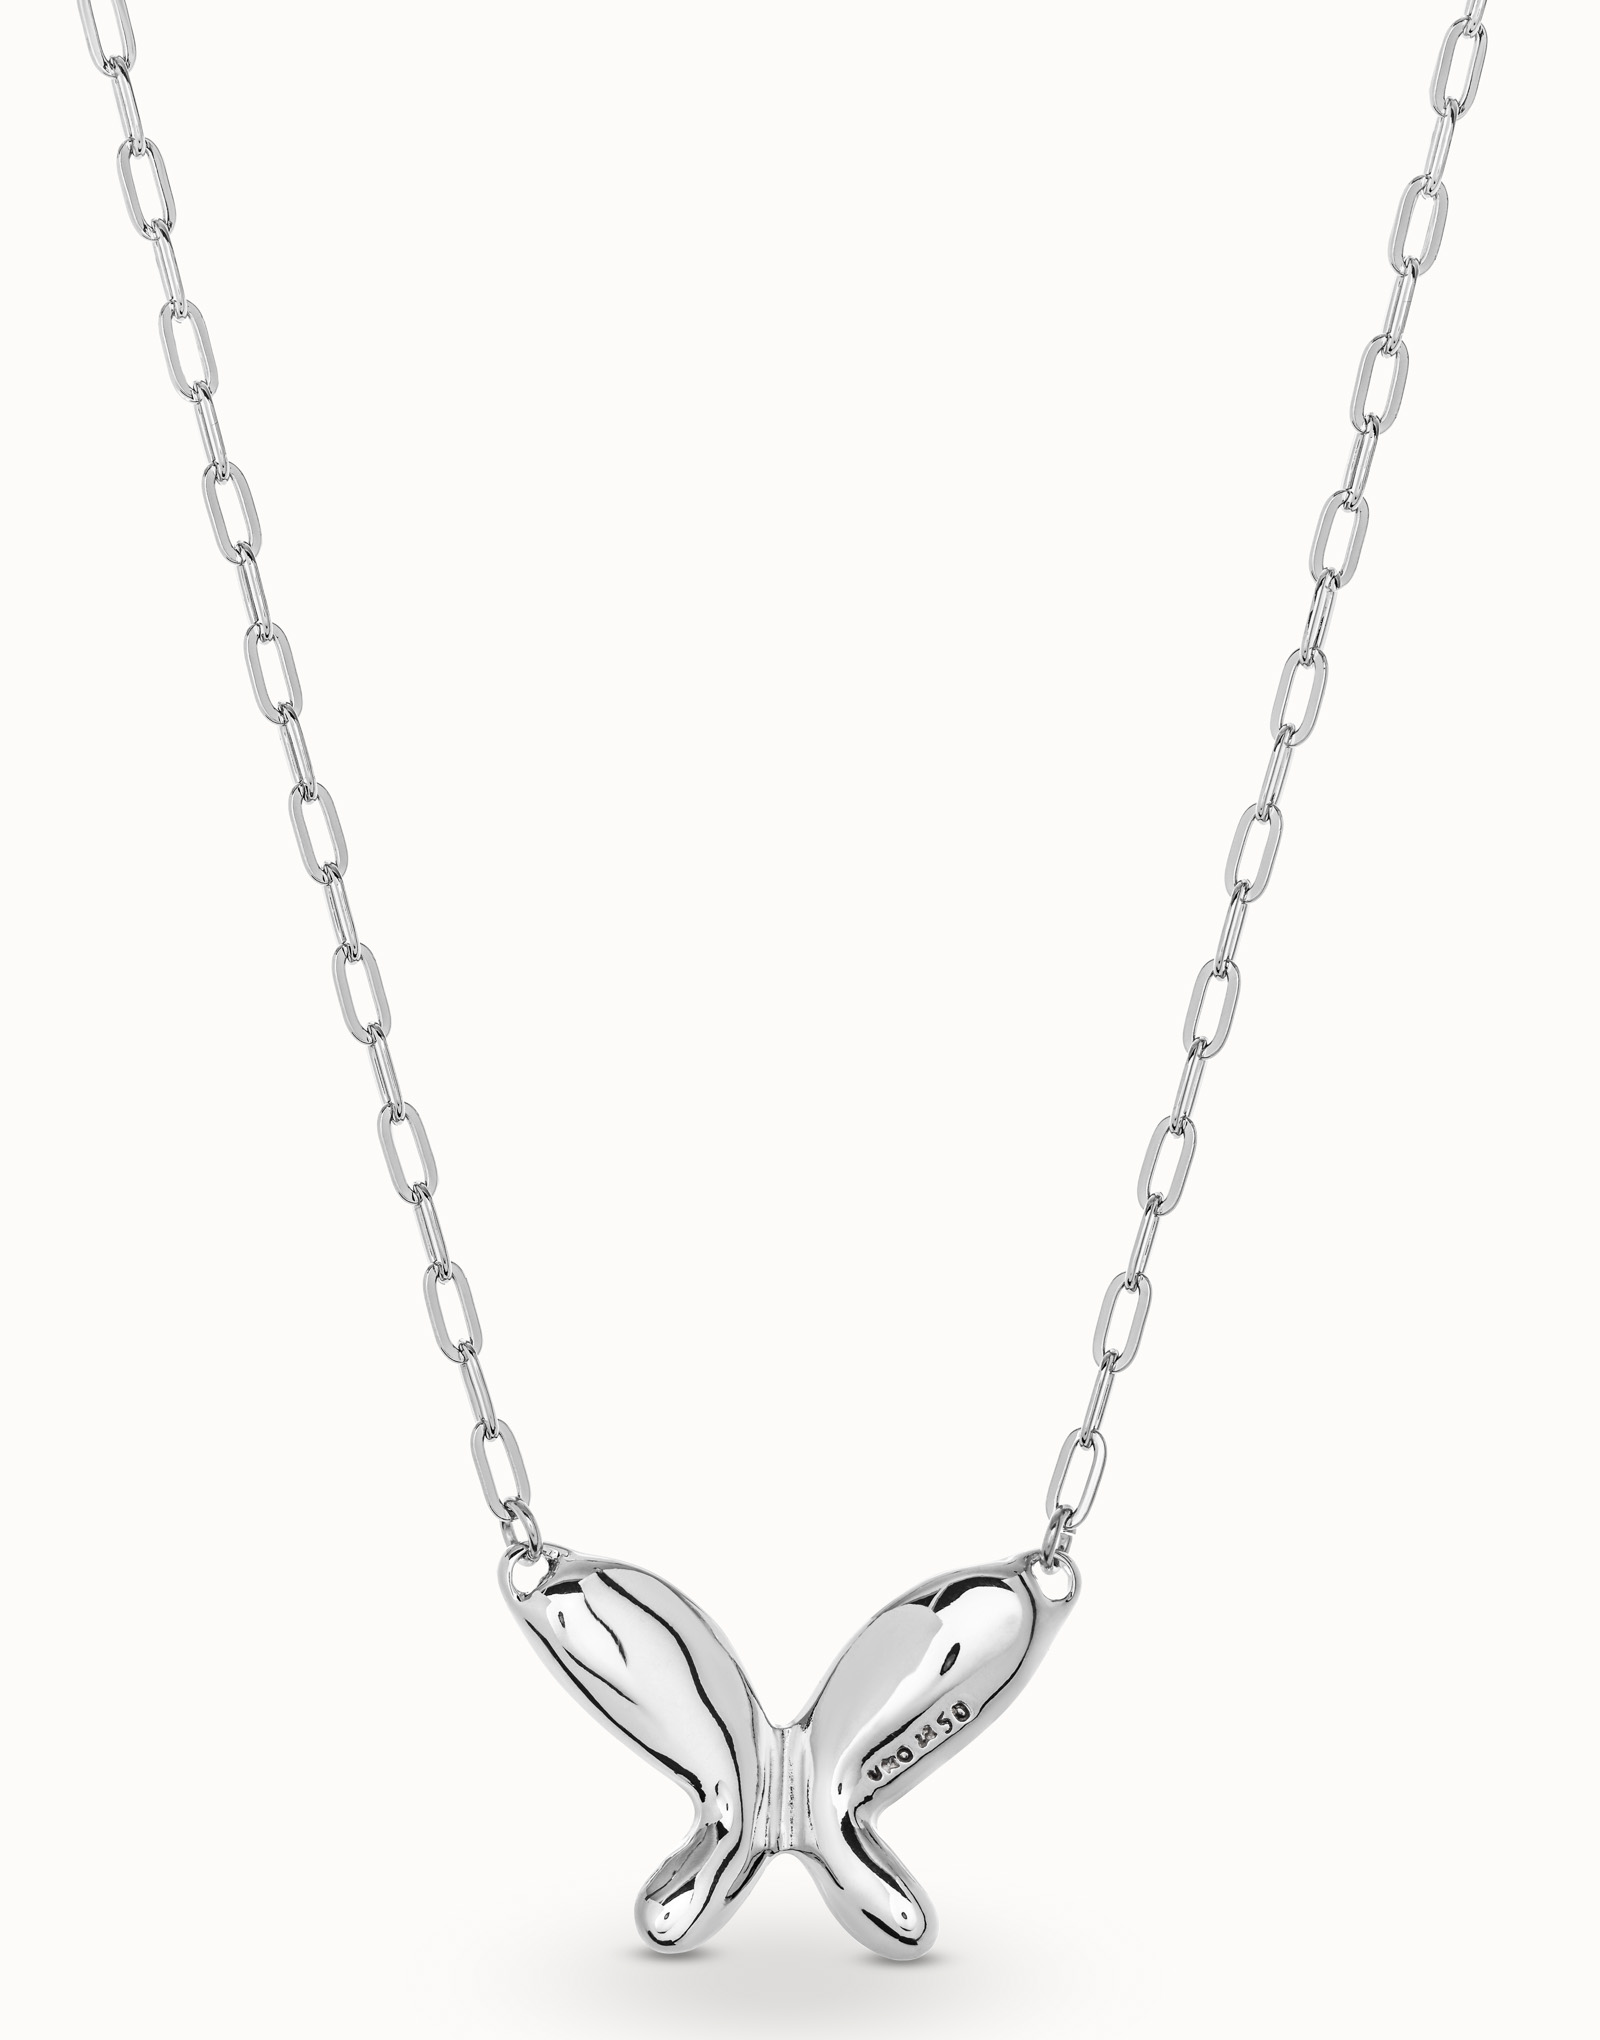 Collana lunga placcata argento Sterling con catenina a maglie, Argent, large image number null